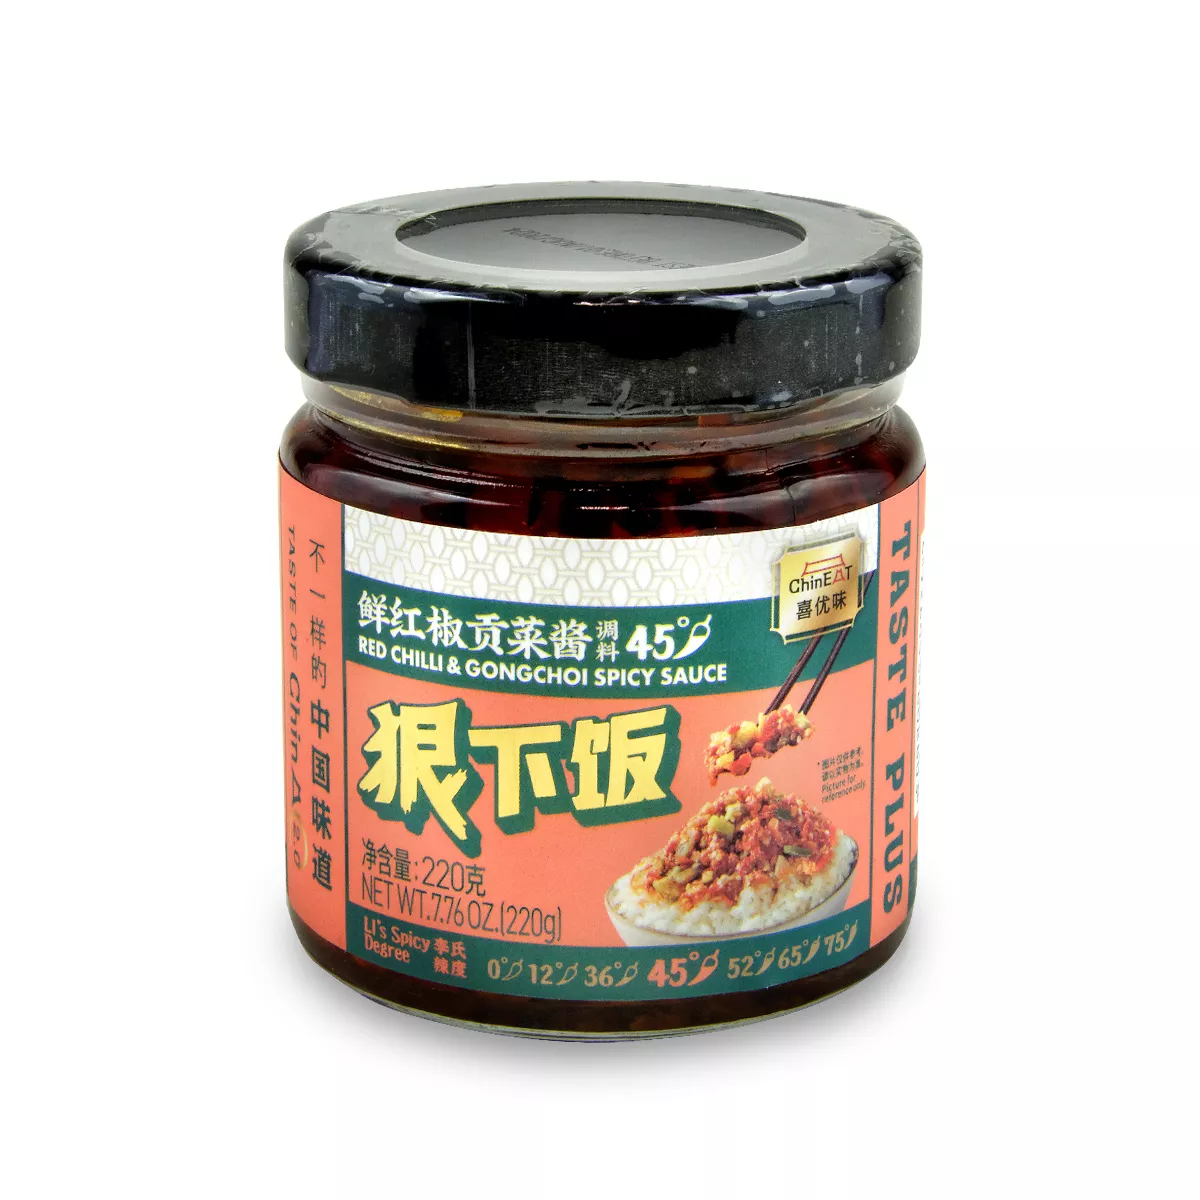 Sos Spicy Red Chilli & Gongchoi CHIN EAT 220g, [],asianfood.ro